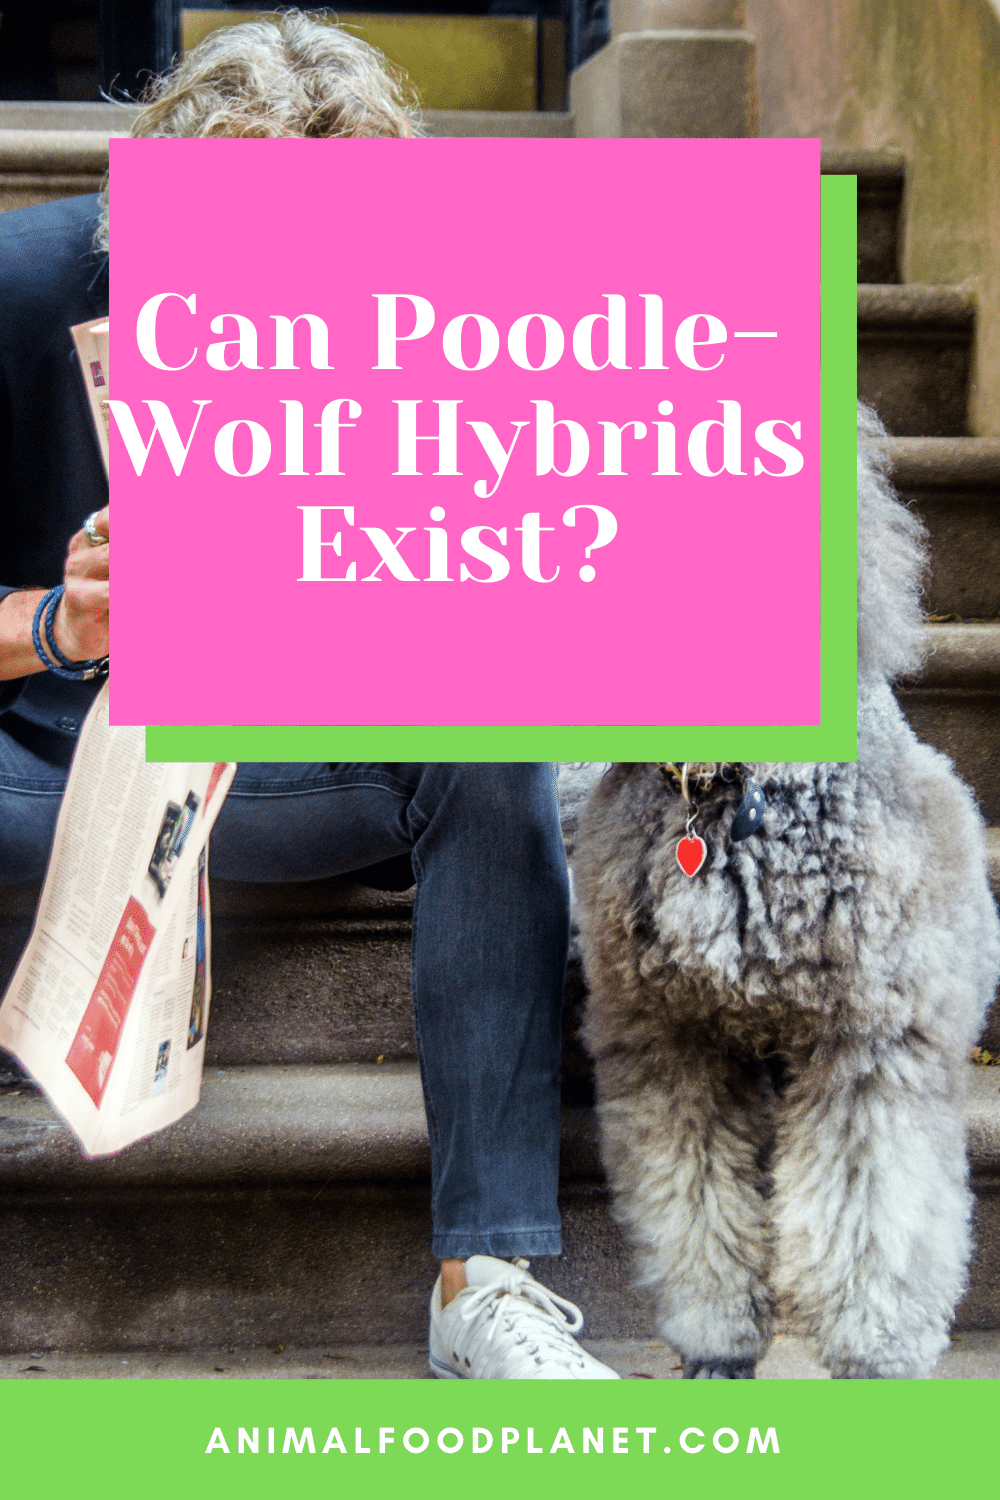 Can Poodle-Wolf Hybrids Exist